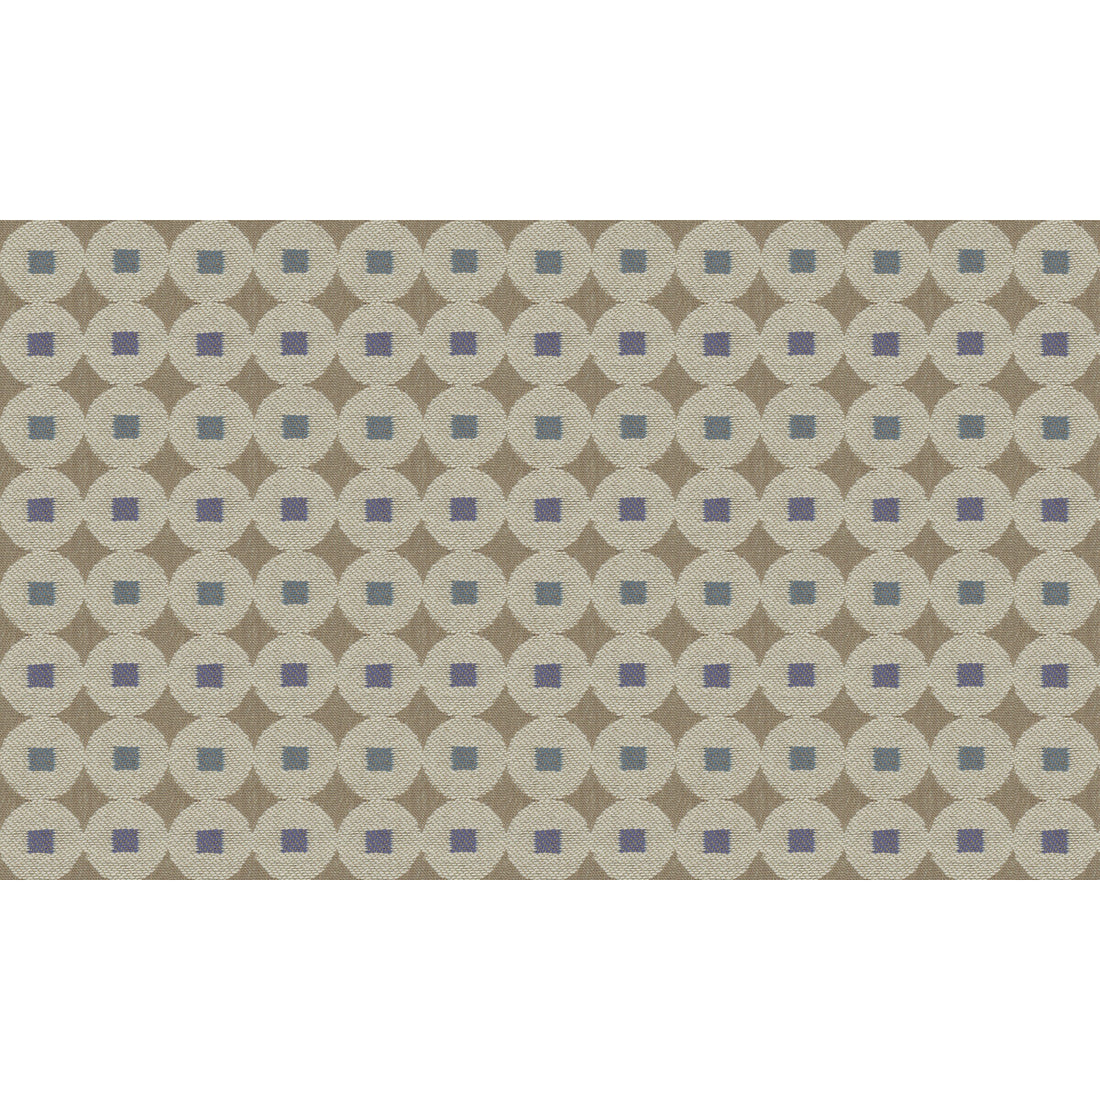 Tiempo fabric in amalfi color - pattern 34651.516.0 - by Kravet Contract in the Gis collection